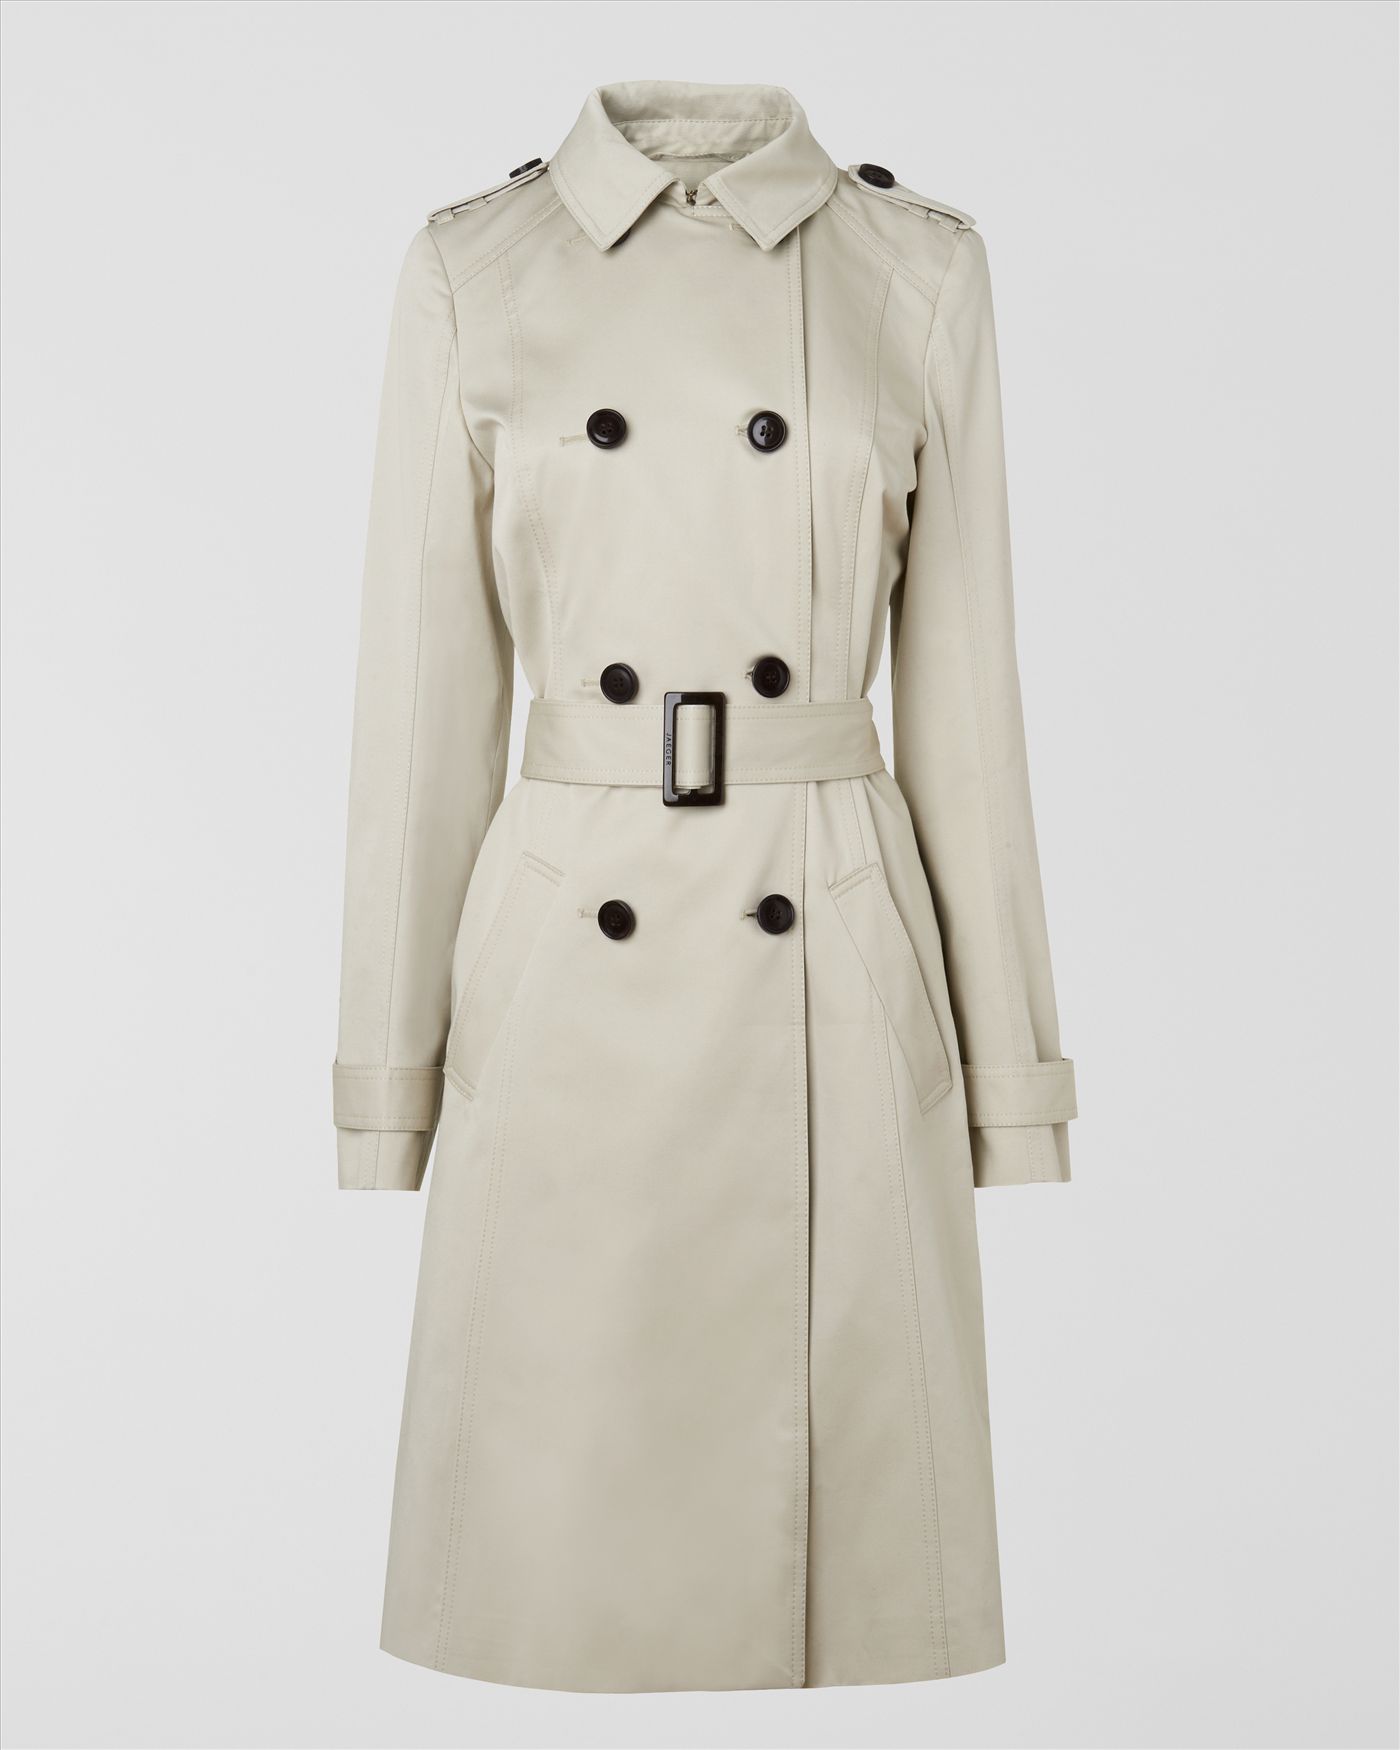 Jaeger Classic Trench Coat in Gray (Camel) | Lyst